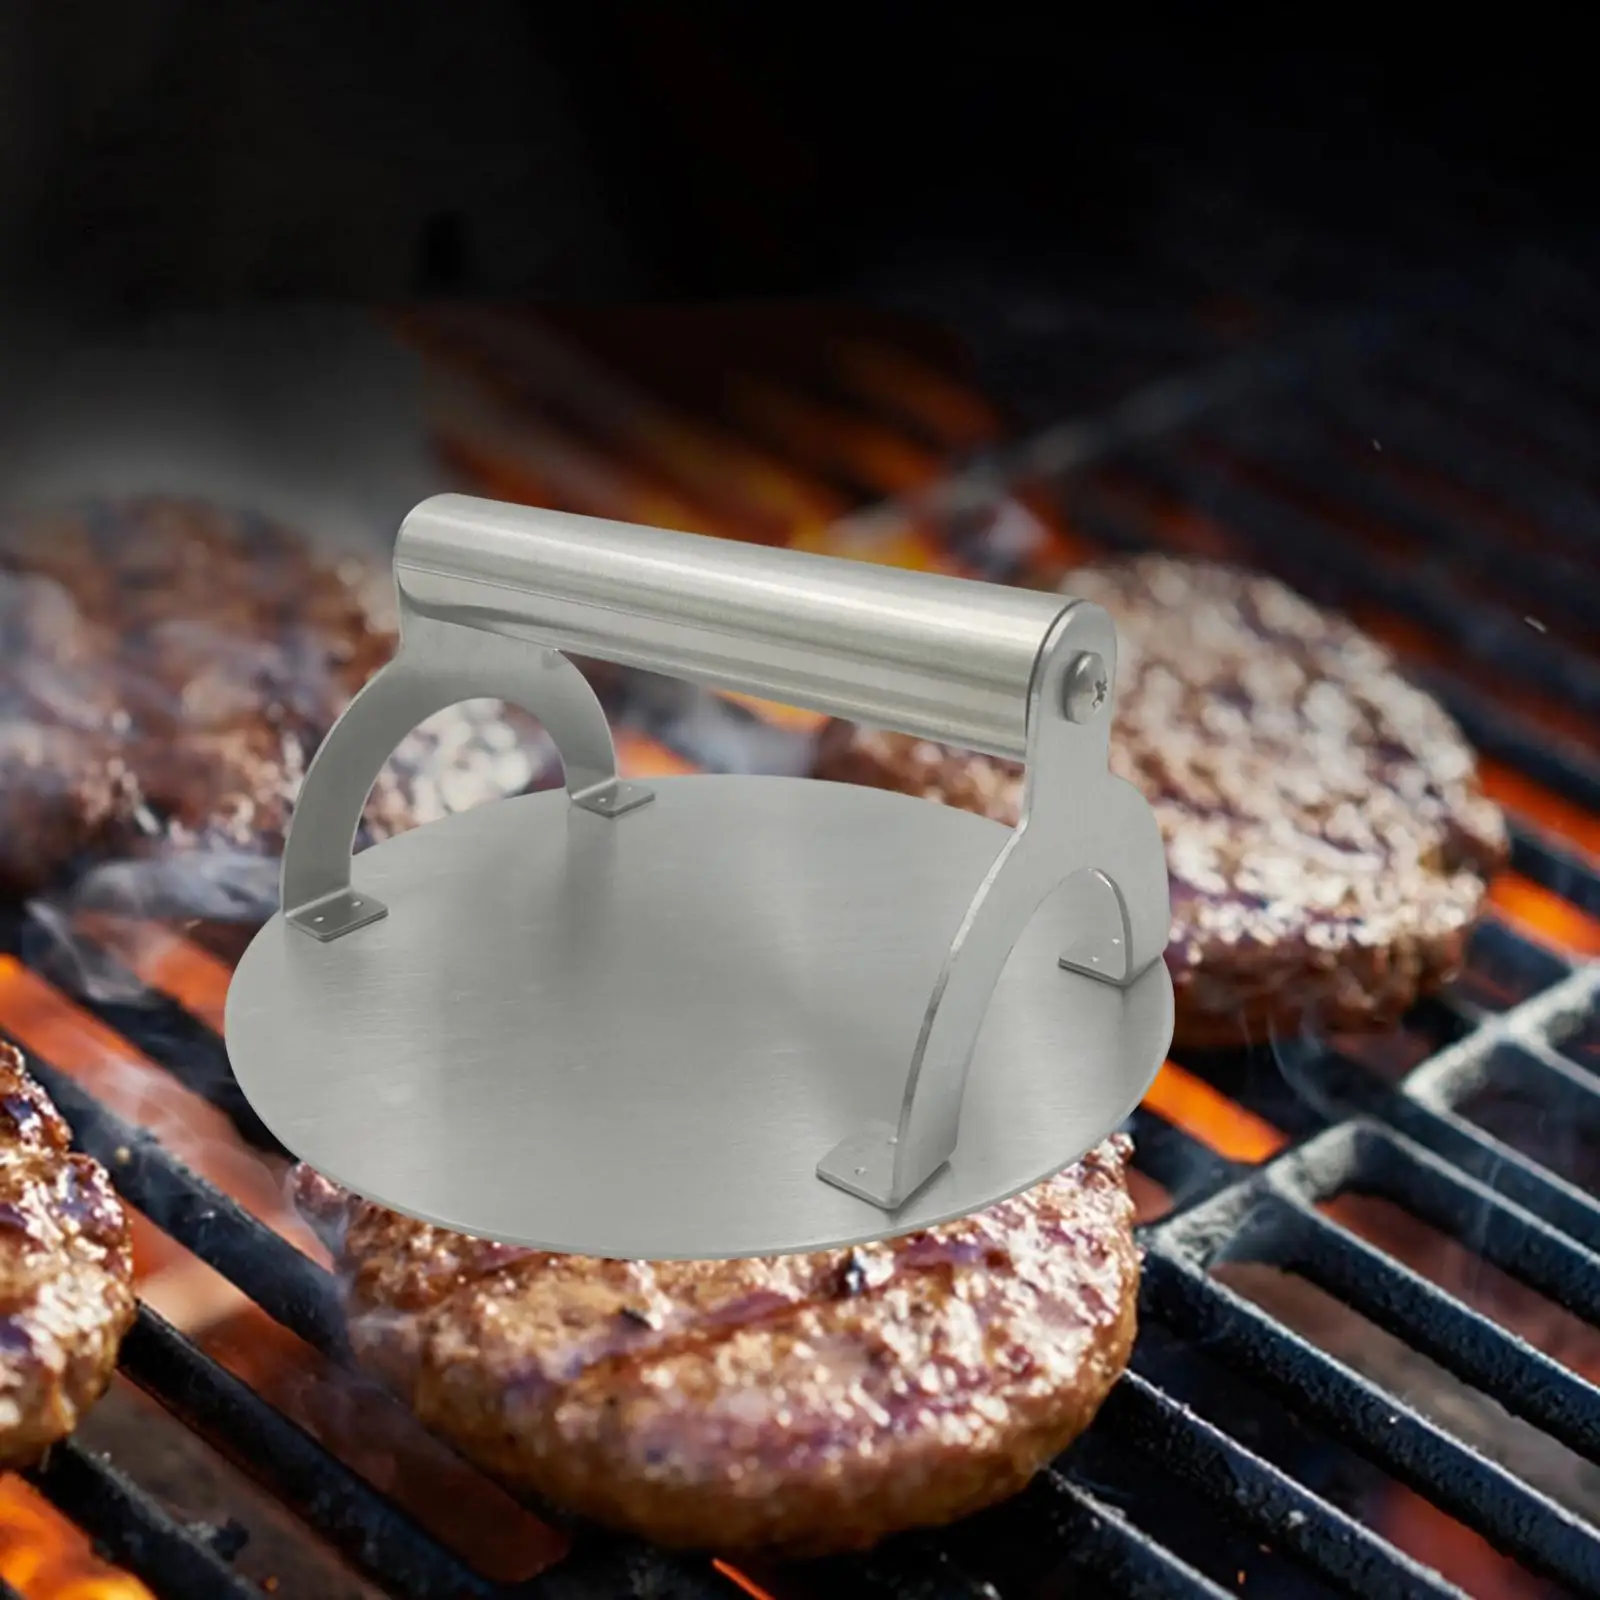 Stainless Steel Burger Press Kitchen Accessories Nonstick Grill Press Meat Beef Burger for Home Restaurant Cooking Barbecue Beef